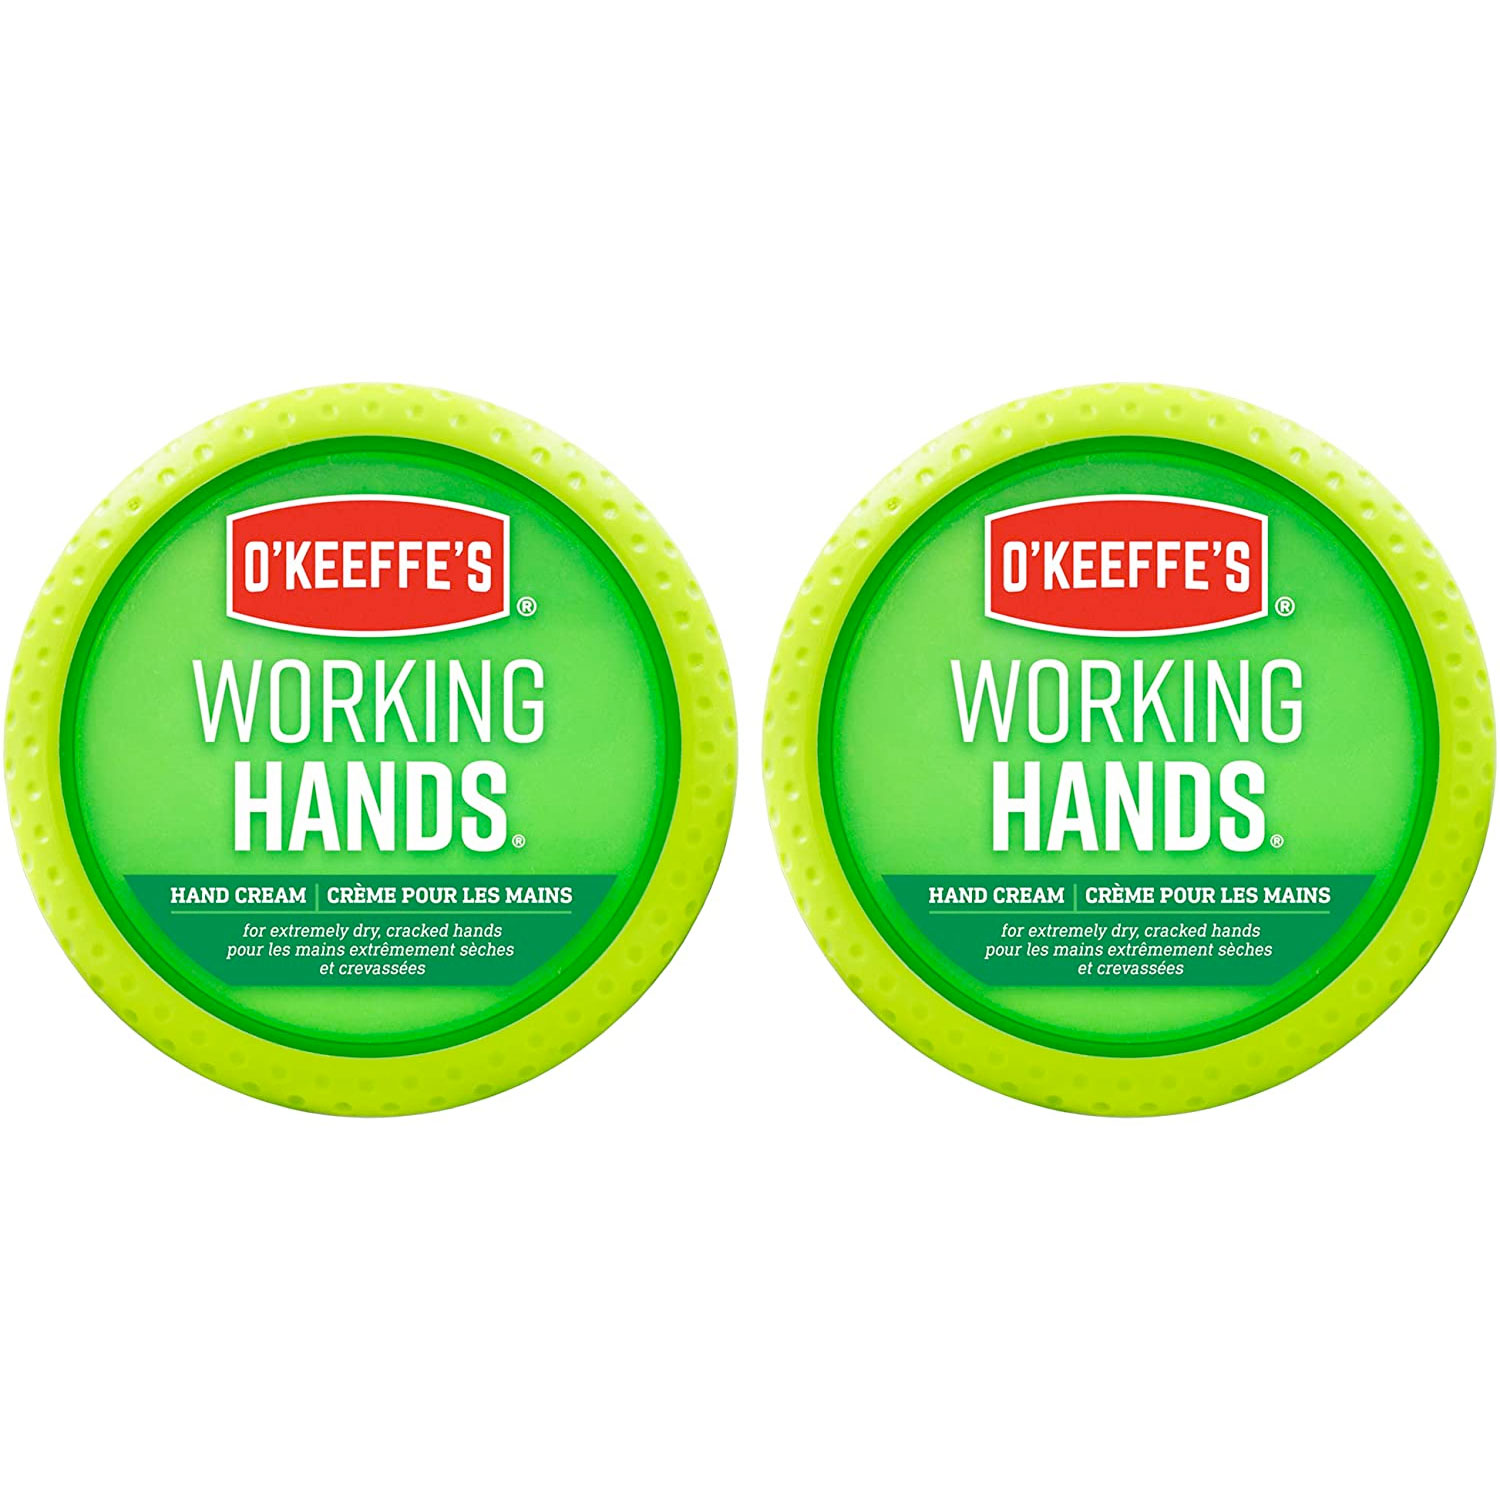 Amazon：O’Keeffe’s Working Hands Hand Cream(96g, Pack of 2)只賣$15.70